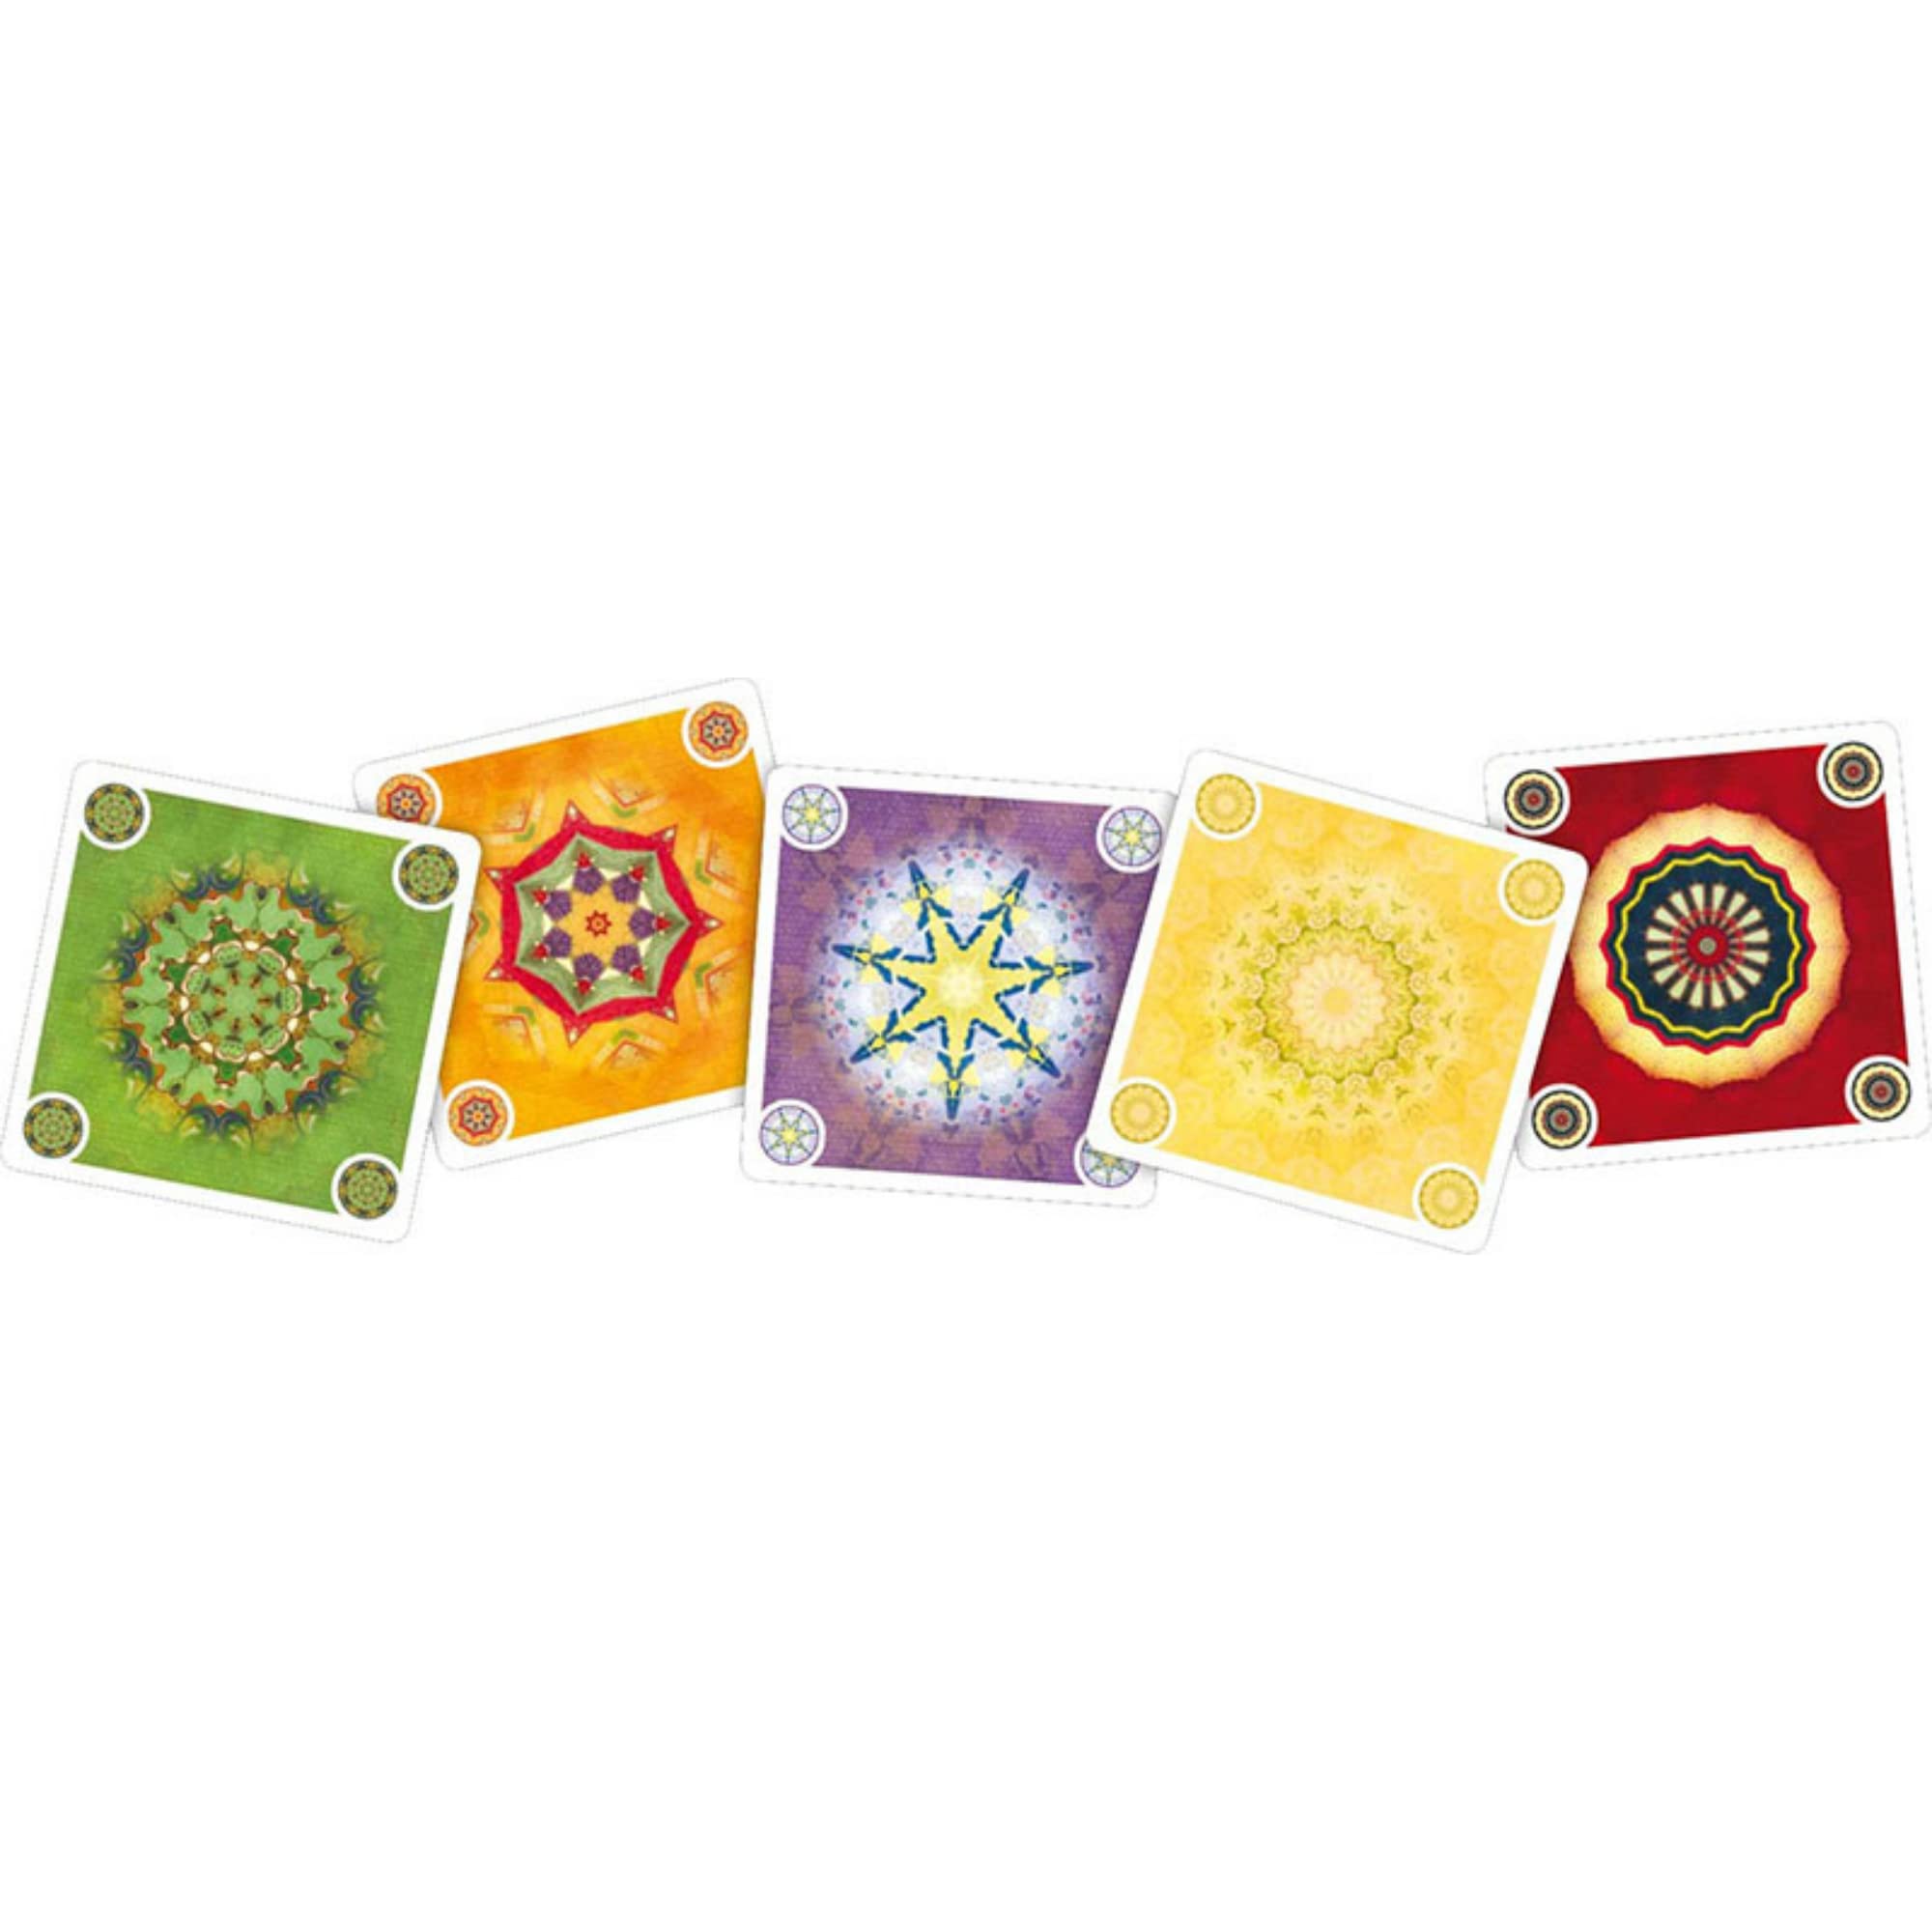 Mandala Board Game | Challenging Two-Player Game with Beautiful Abstract Art | Strategy Board Game for Adults and Kids | Ages 10+ | 2 Players | Average Playtime 30 Minutes | Made by Lookout Games